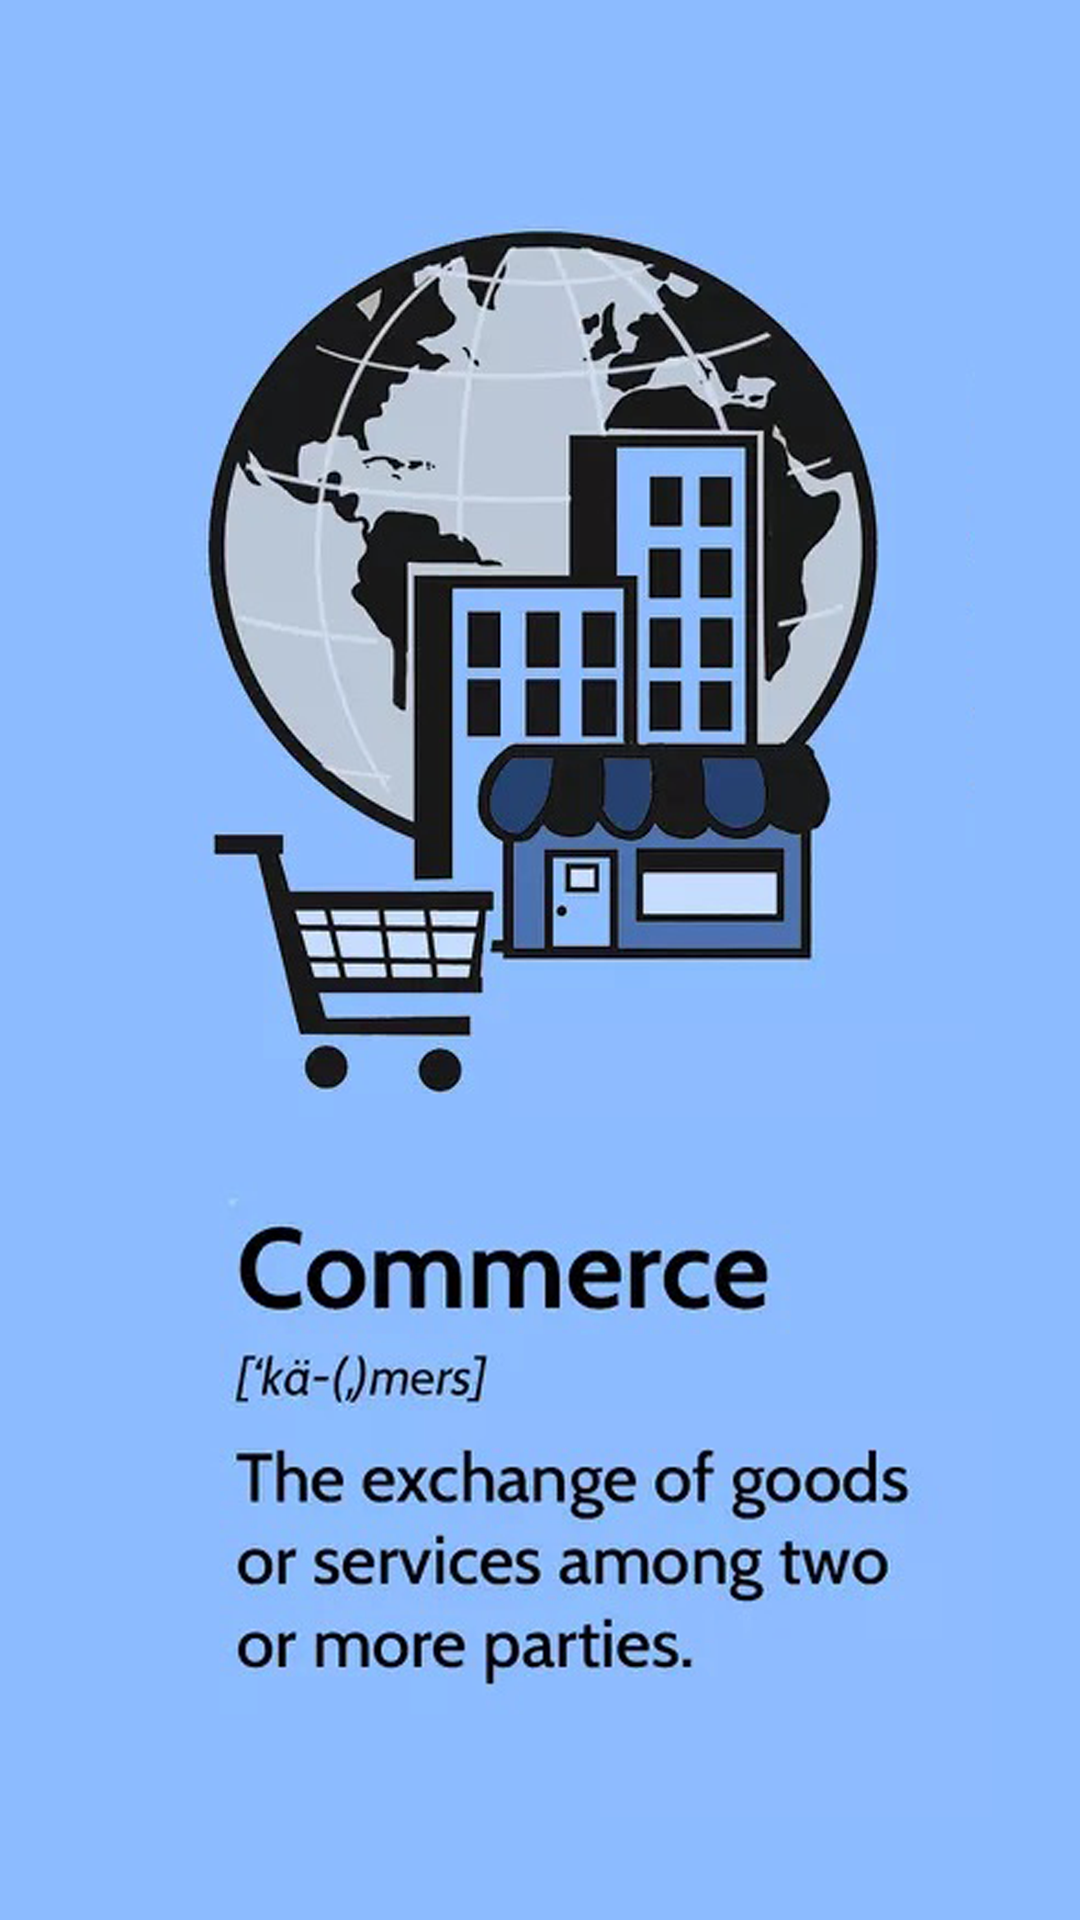 Infographic illustrating BOFU Marketing Strategies for converting customers through the exchange of goods or services.